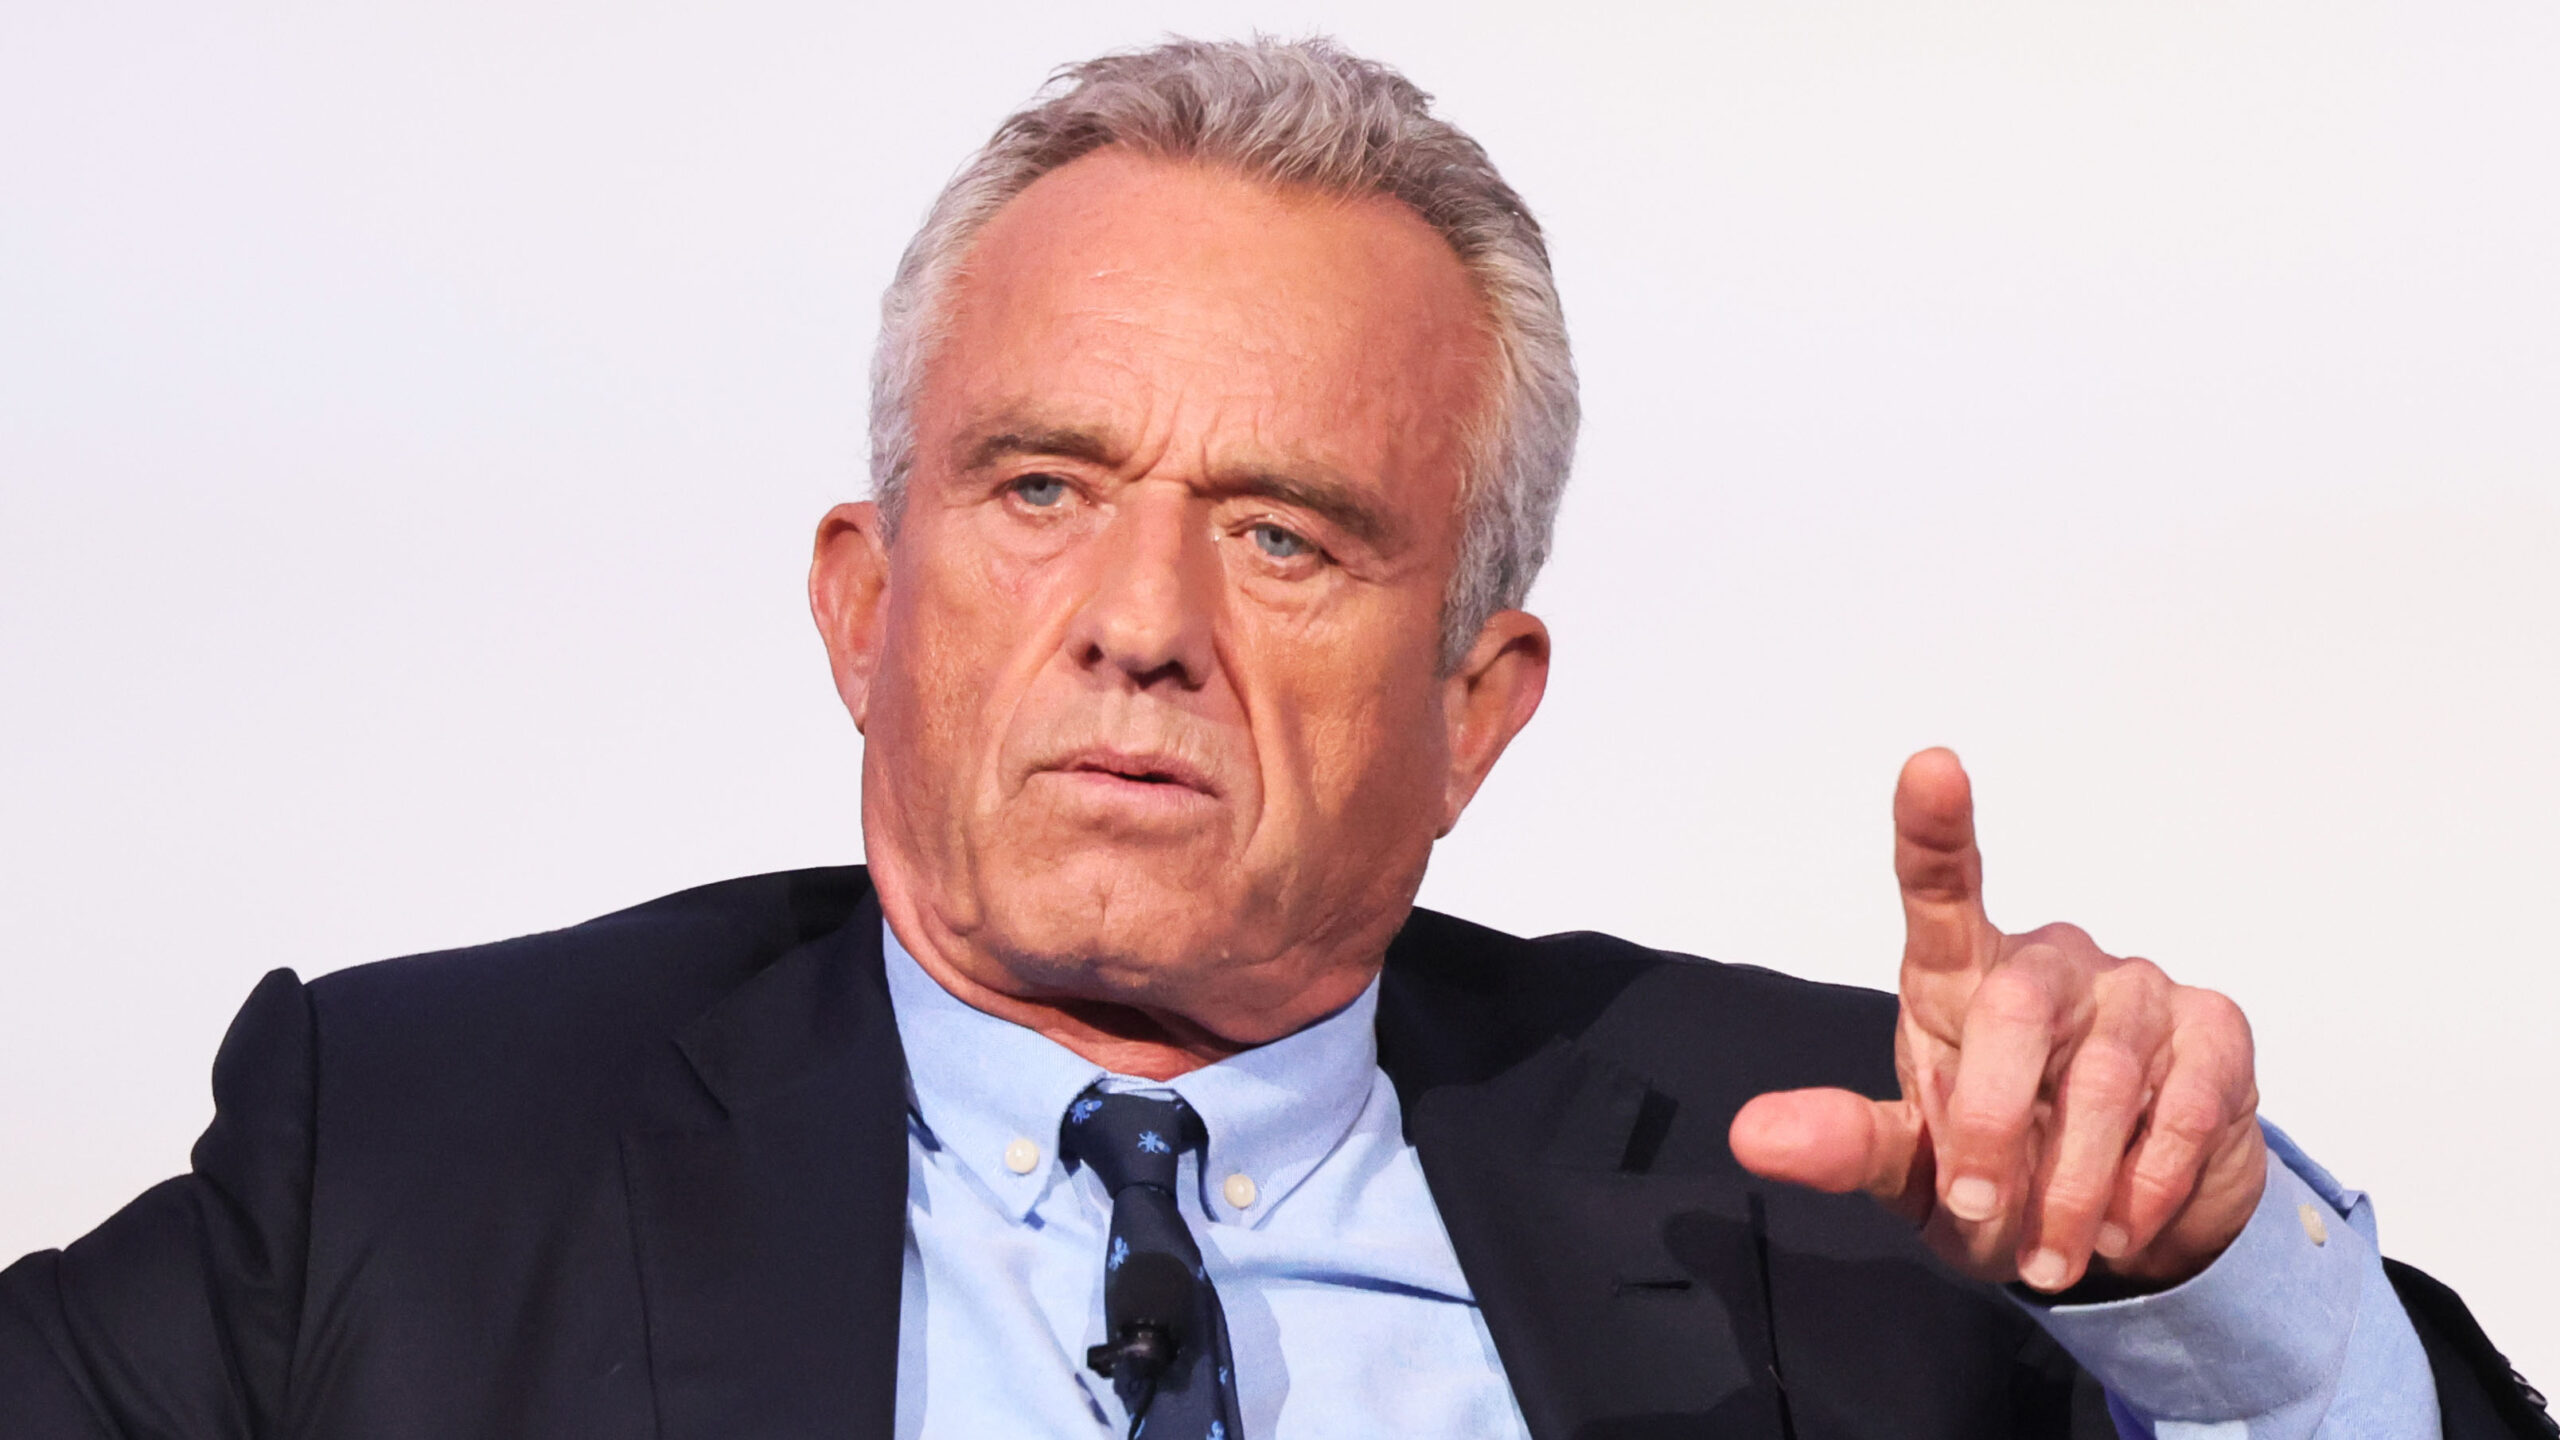 RFK Jr. attributes cognitive issues to a worm that consumed part of his brain and perished